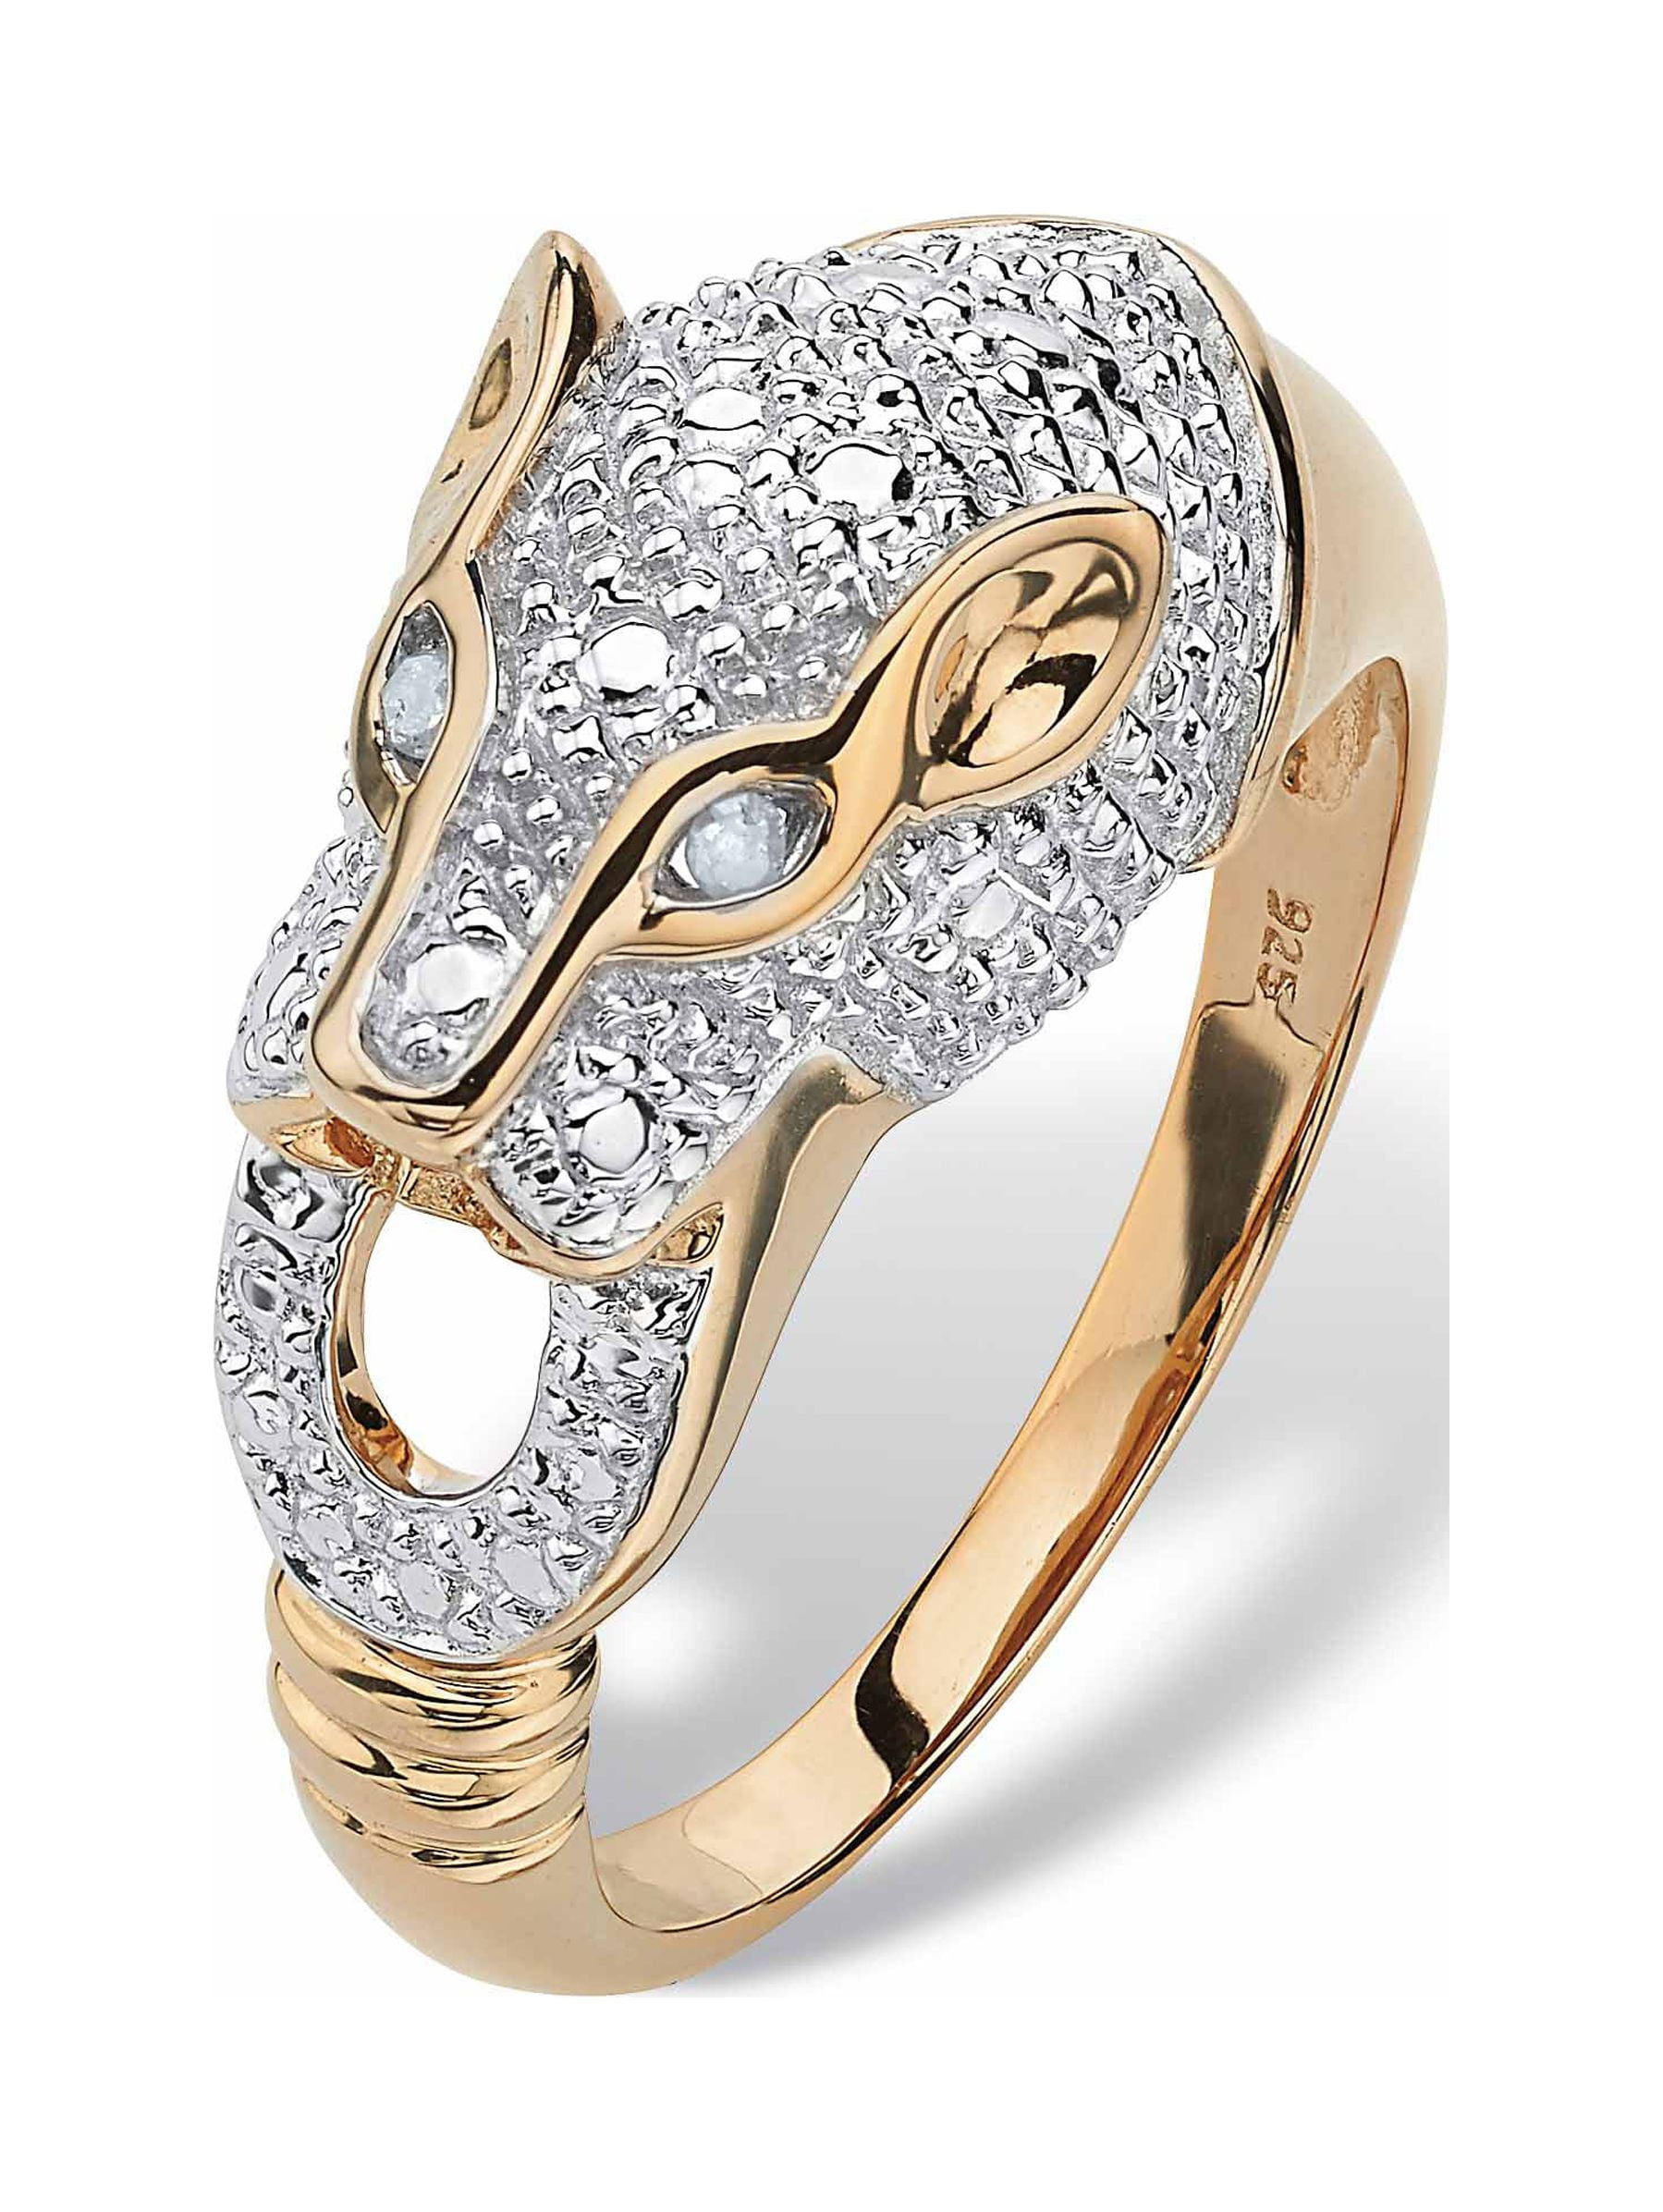 PalmBeach Jewelry Round Pave Diamond Accent Panther Ring in 18k Gold plated Sterling Silver 4ad93f97 9d35 4b56 9e4c c1acf37e22e1.e7ce266c037beeb2d0ea9c56e2bb9f8a